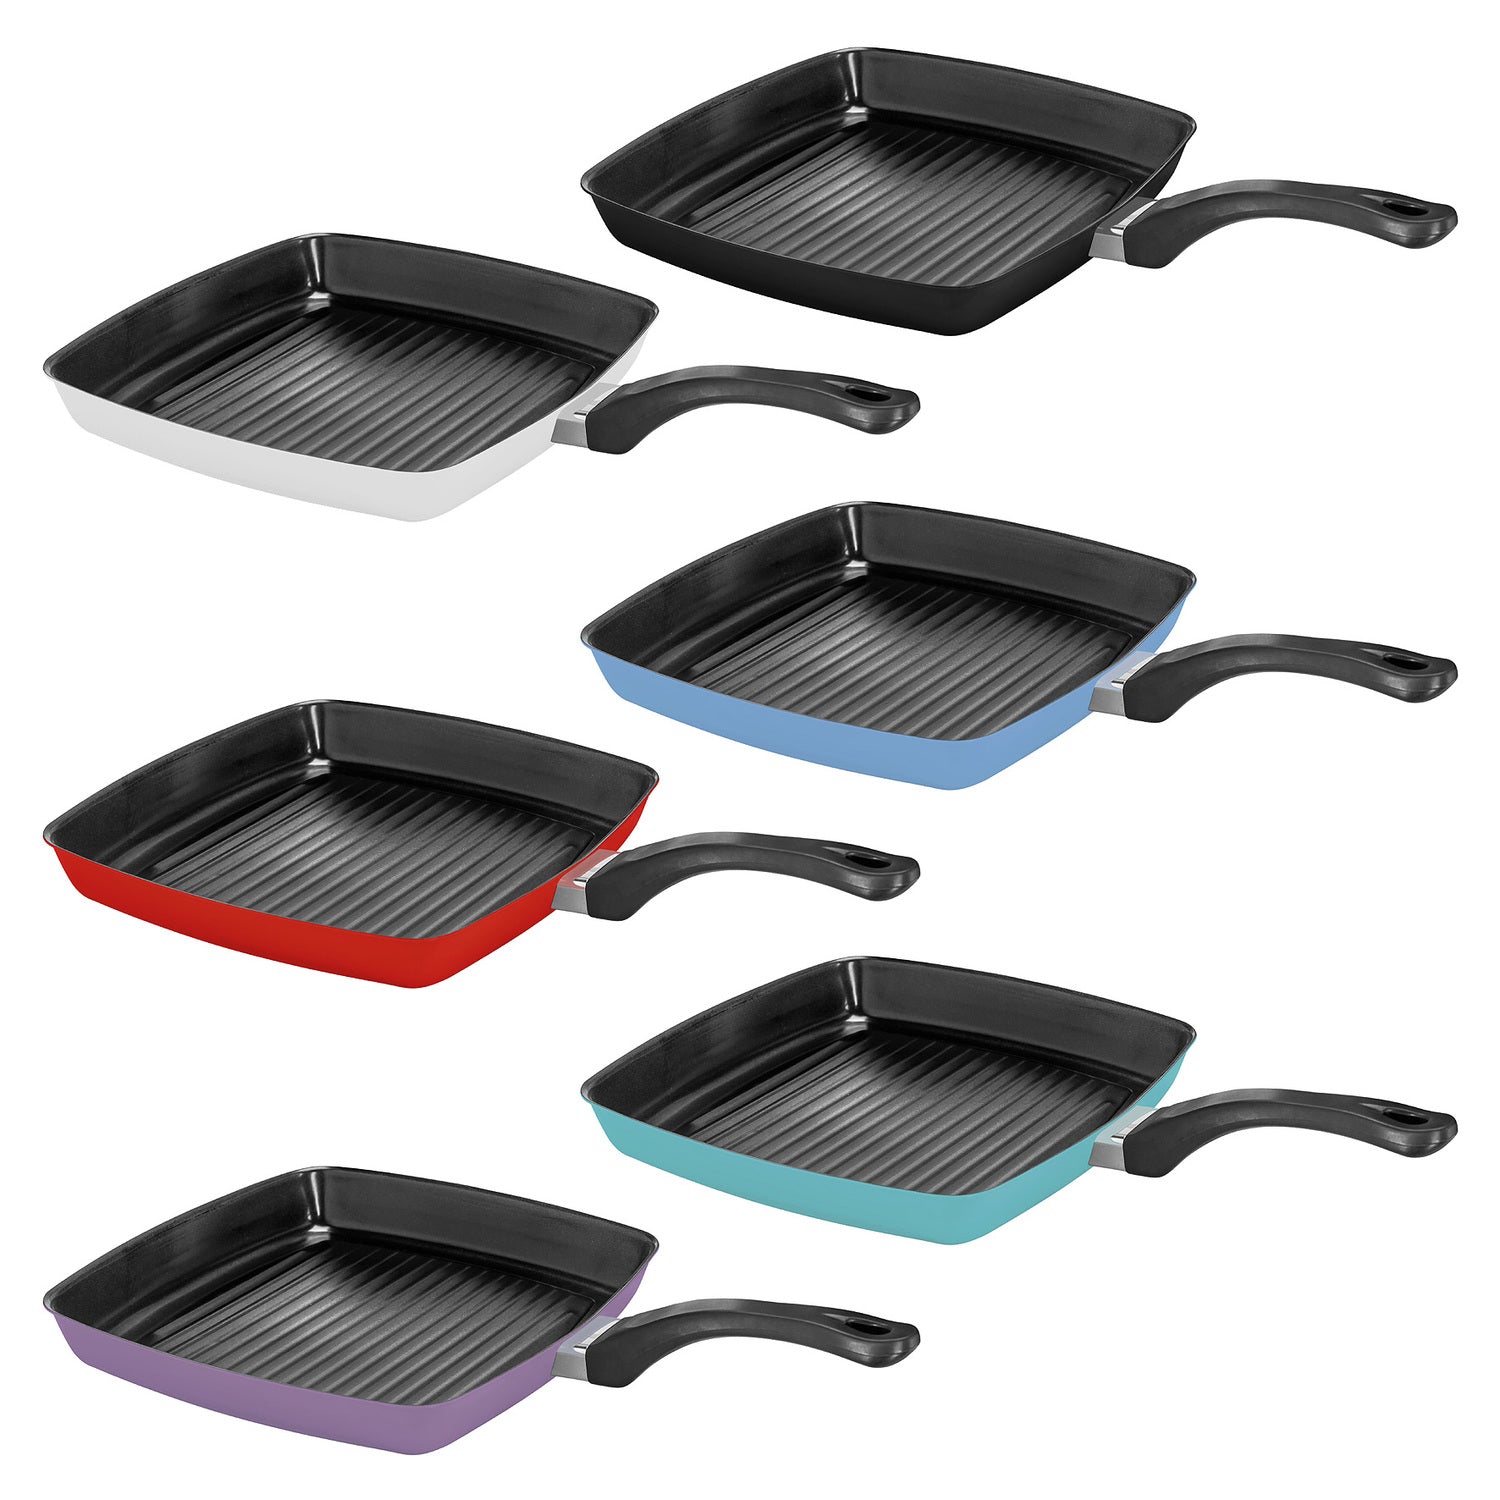 Judge Speciality Cookware 28cm Grill Pan